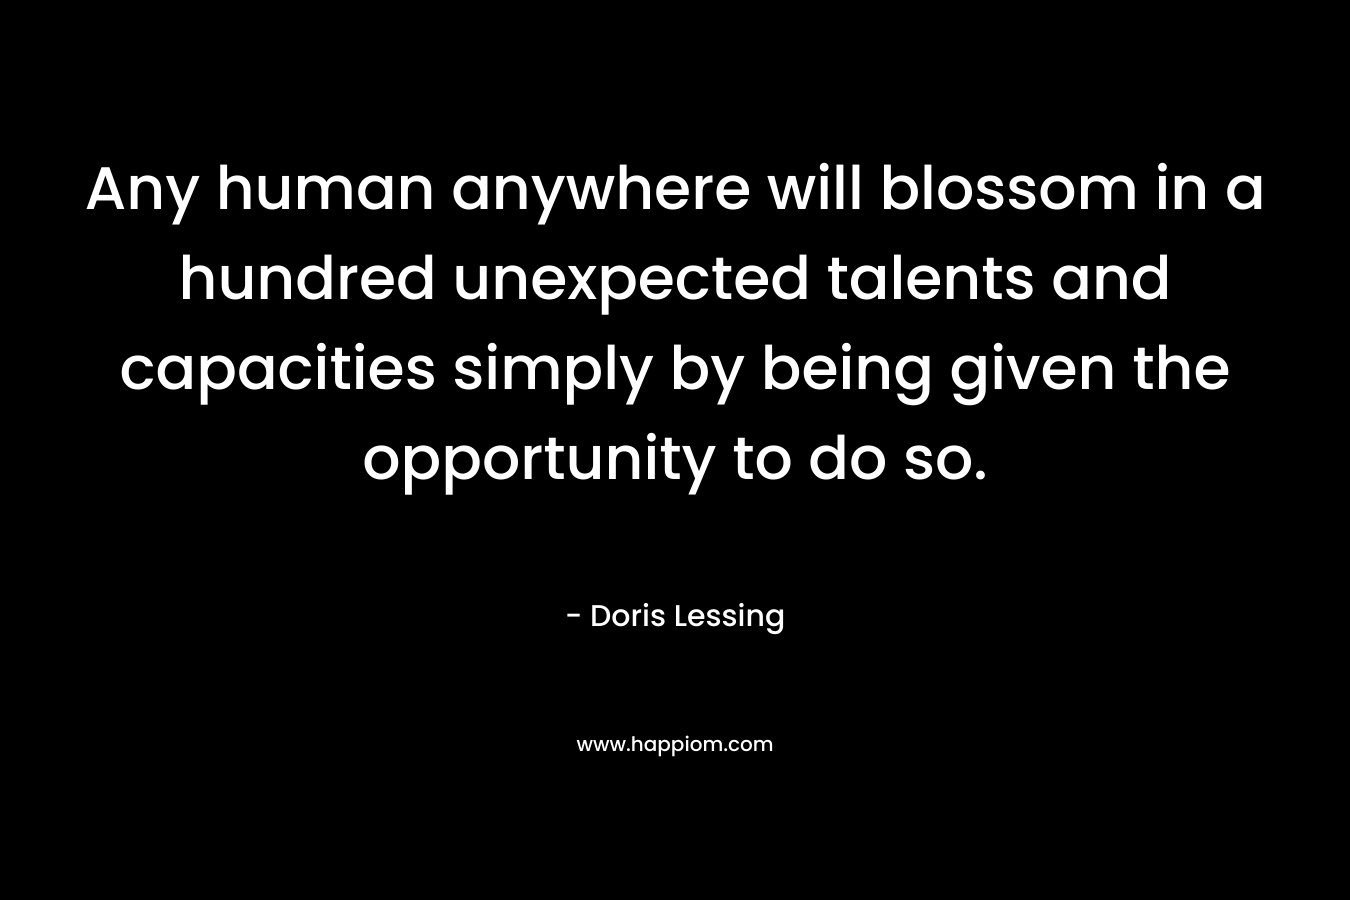 Any human anywhere will blossom in a hundred unexpected talents and capacities simply by being given the opportunity to do so. – Doris Lessing